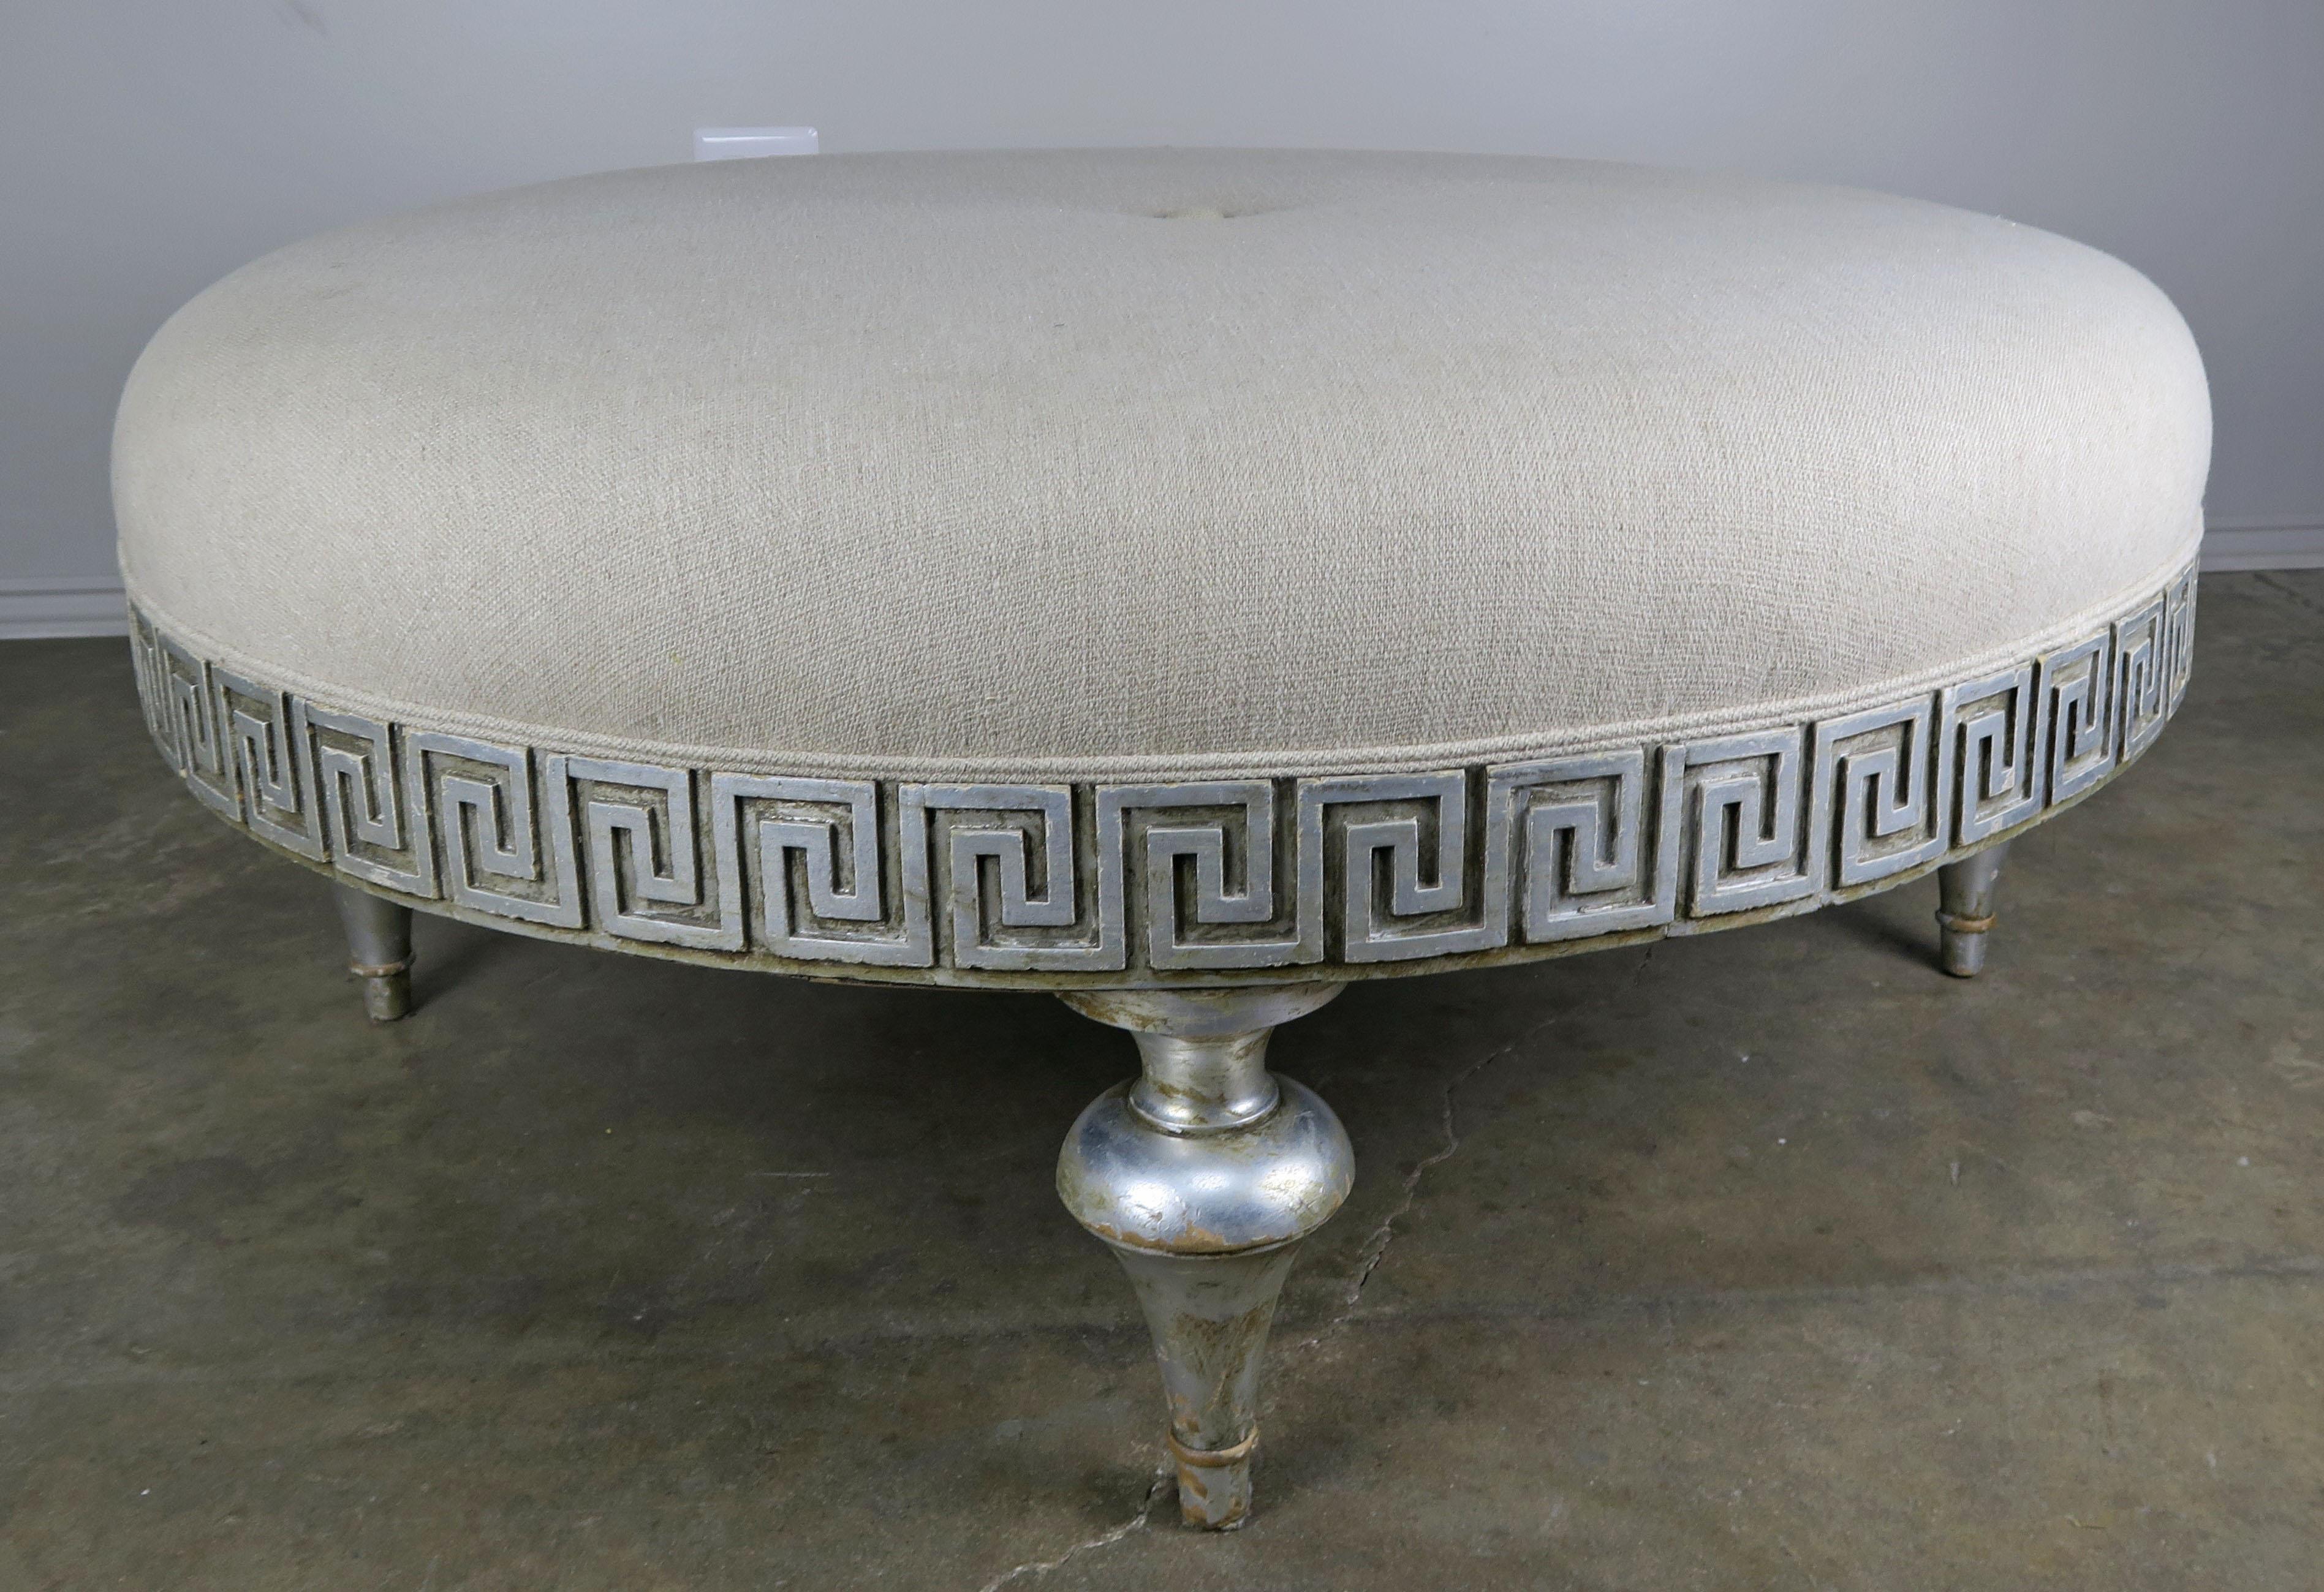 Midcentury carved silver leaf Greek key round shaped linen upholstered ottoman with self cording and center button detail. The ottoman stands on four legs.